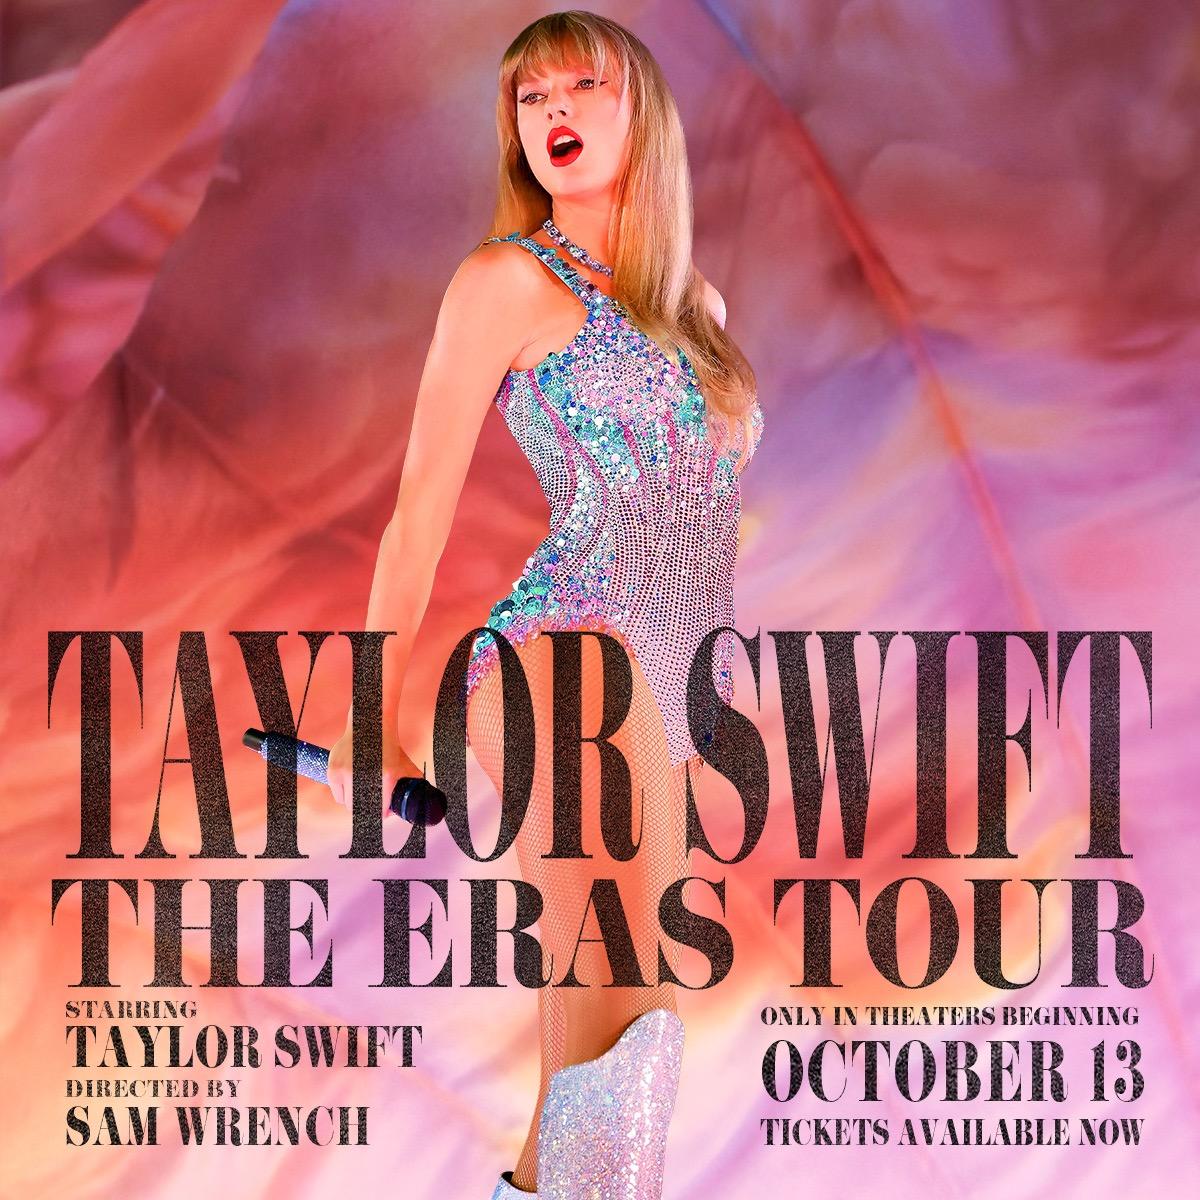 Taylor Swift Eras Tour Concert Film Tickets, Trailer, and Everything